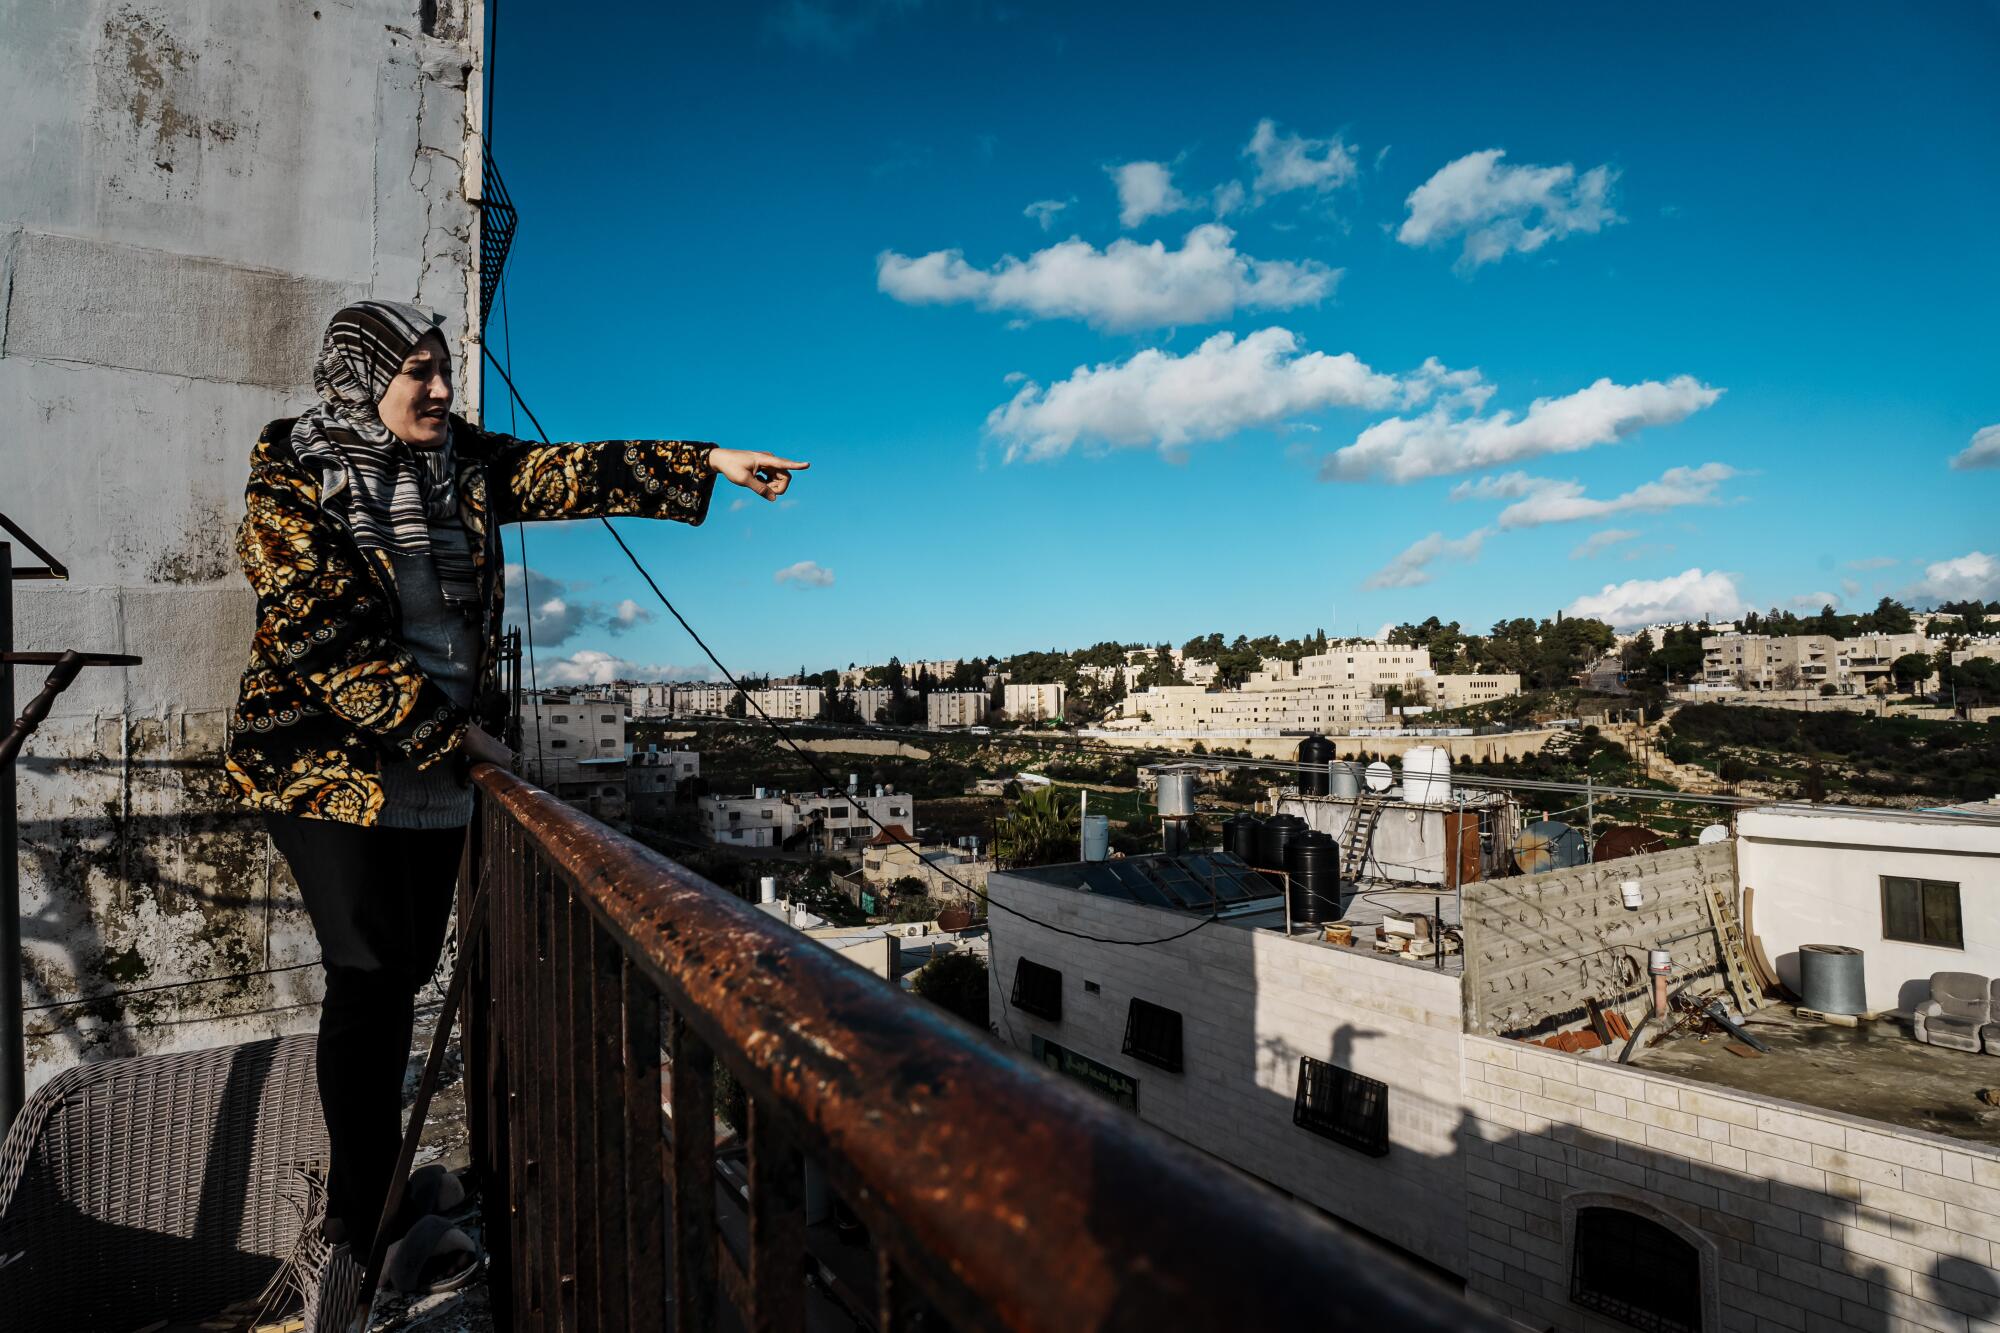 A woman in a headscarf pointing over the buildings below from her vantage point next to a metal railing